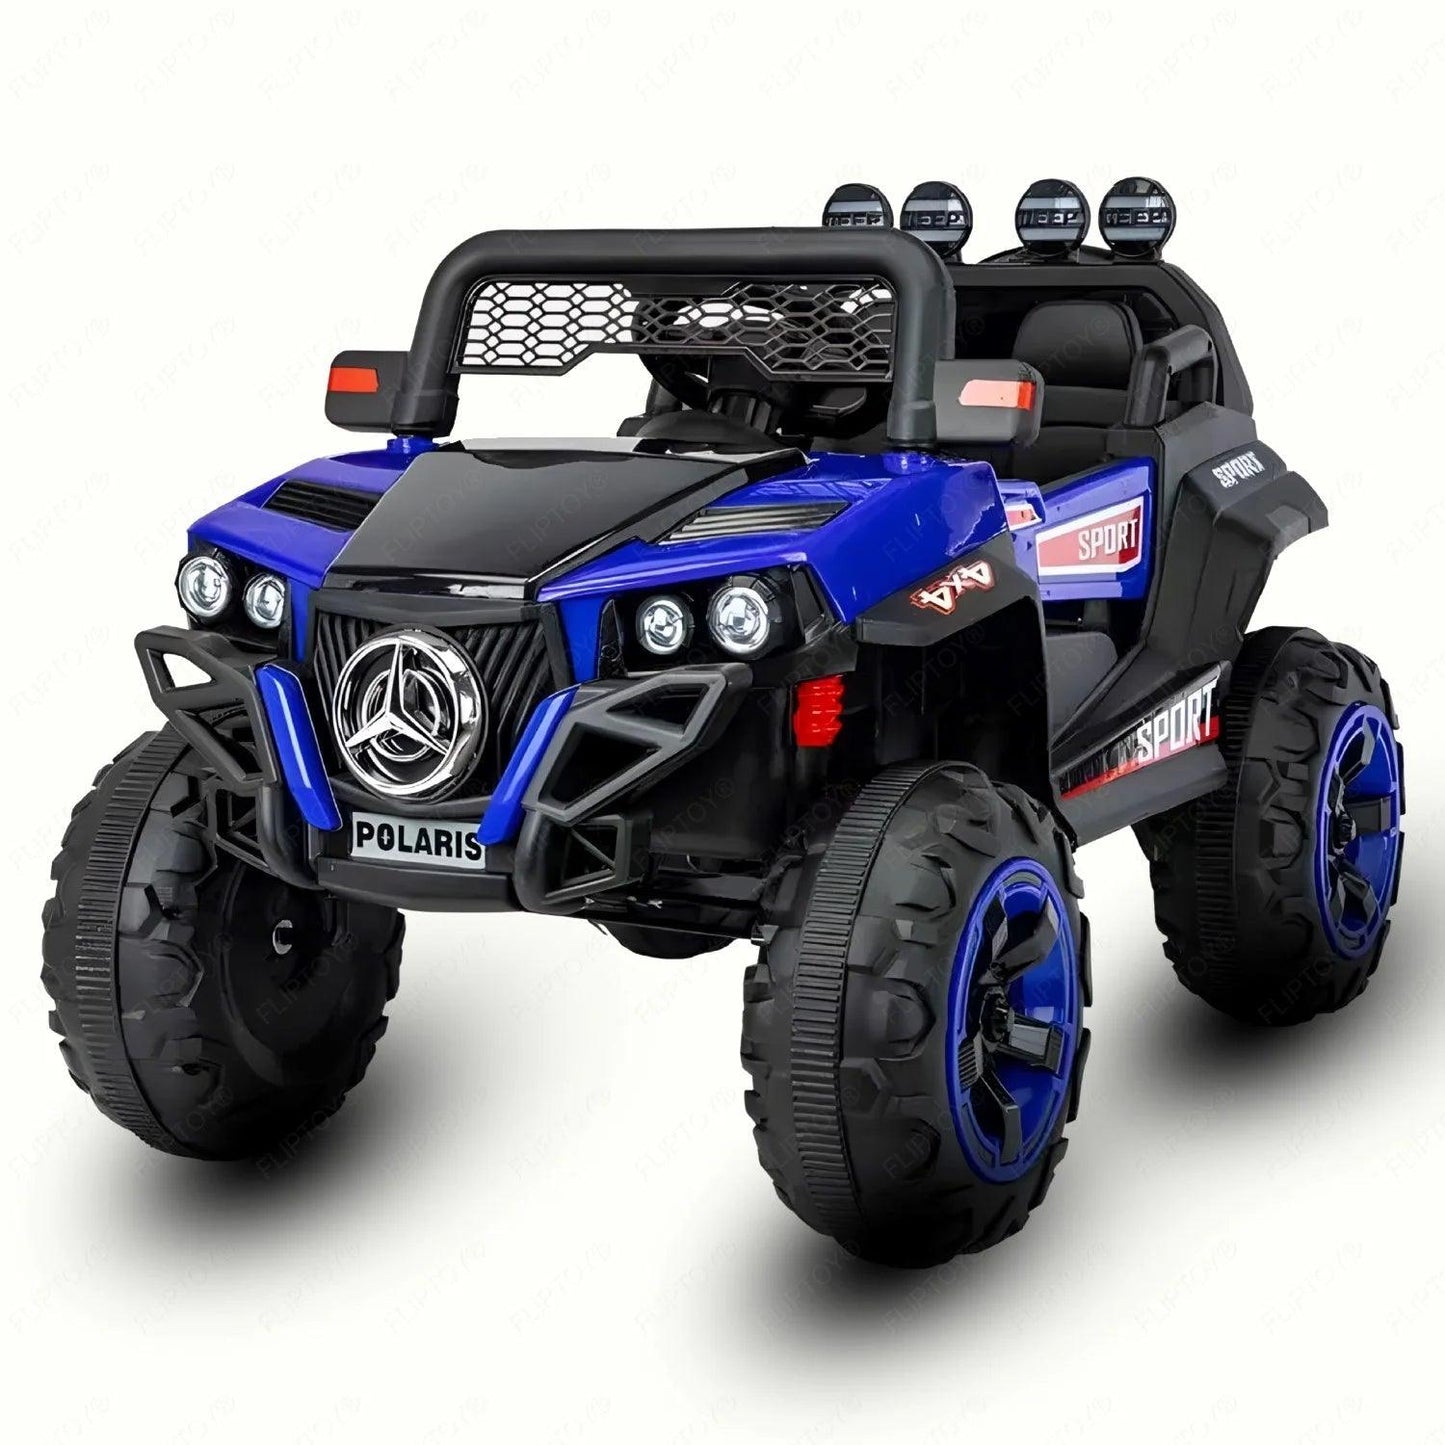 PATOYS | Ride on jeep 4×4 dual seater truck kid ride ons 12v battery operated for Age group 2-6 year Blue Ride on Jeep PATOYS